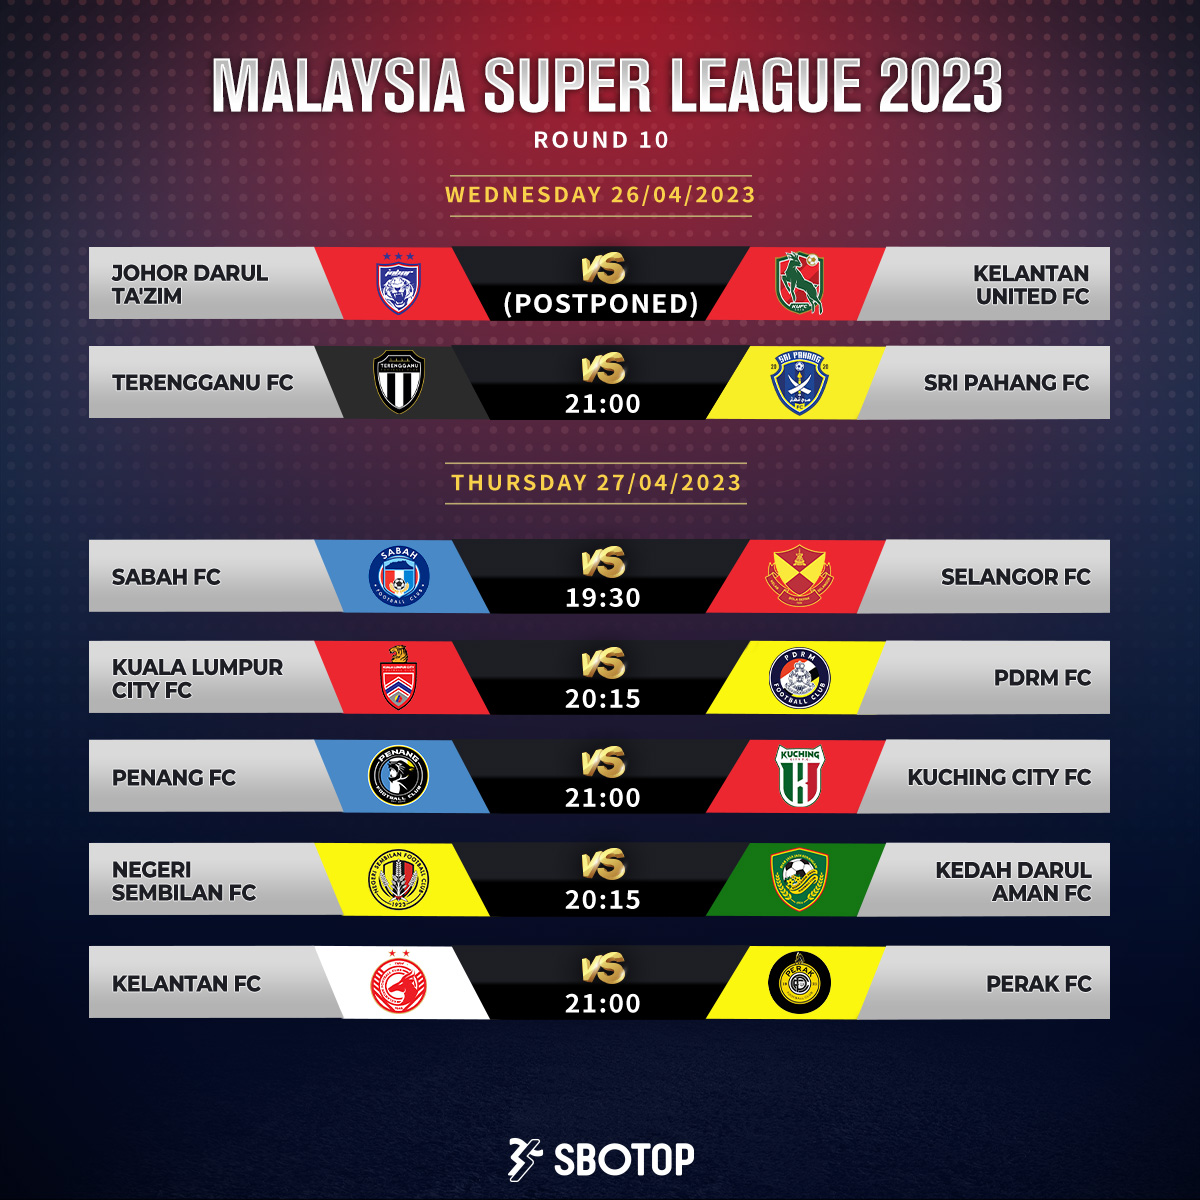 With the match between #JDT and Kelantan United postponed, can other teams take advantage?

#LigaMalaysia #MalaysiaSuperLeague